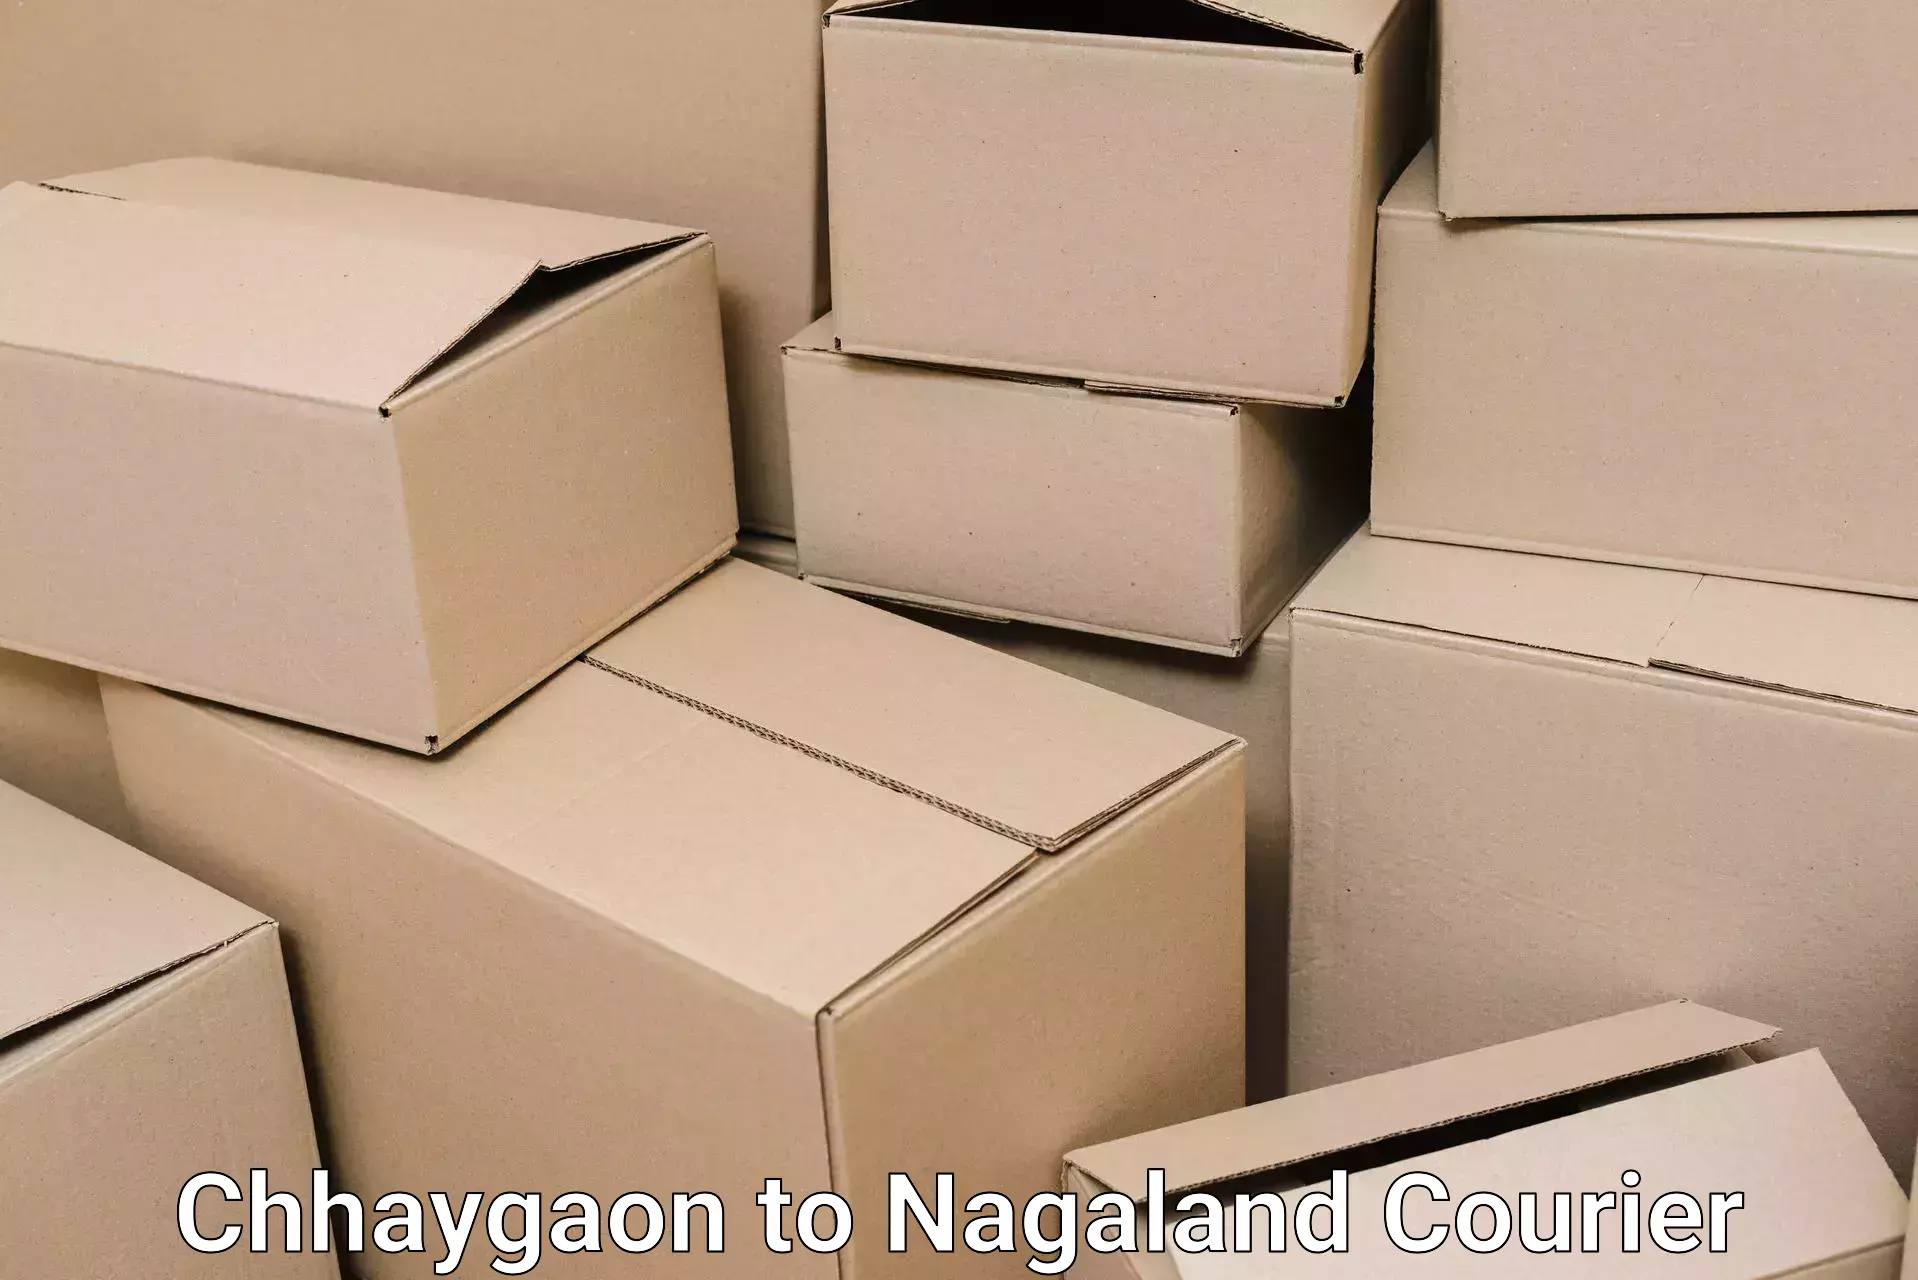 Furniture transport specialists Chhaygaon to Dimapur